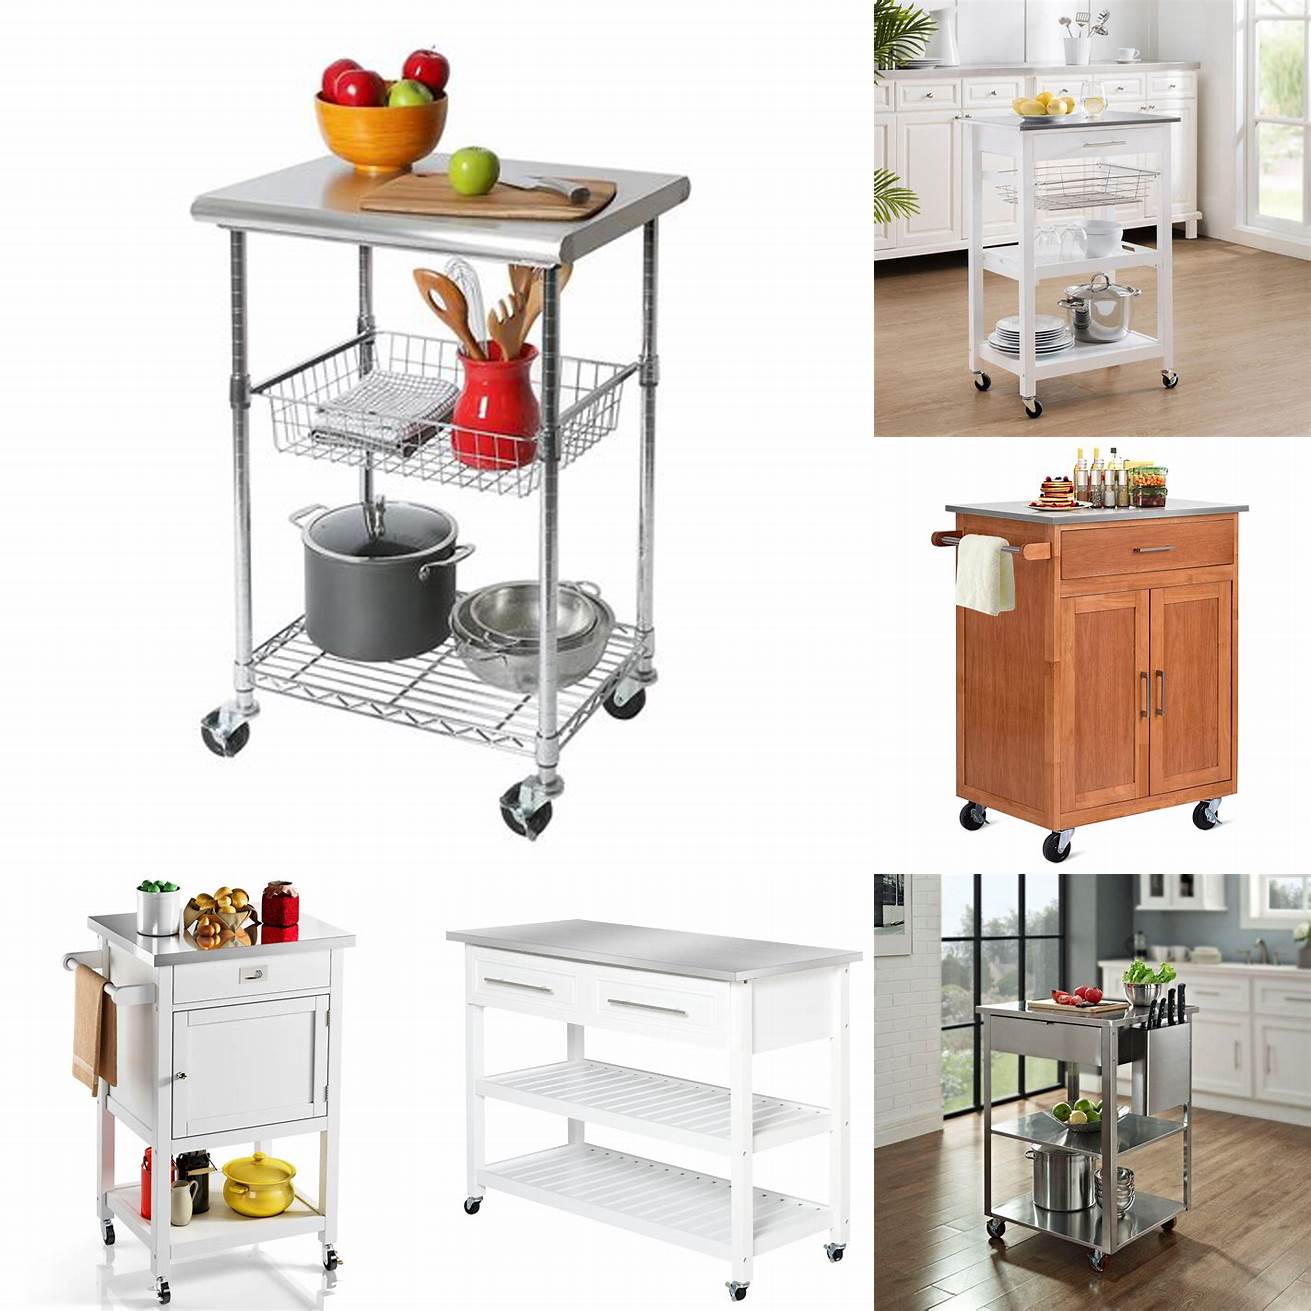 A stainless steel kitchen cart with two shelves and a towel rack